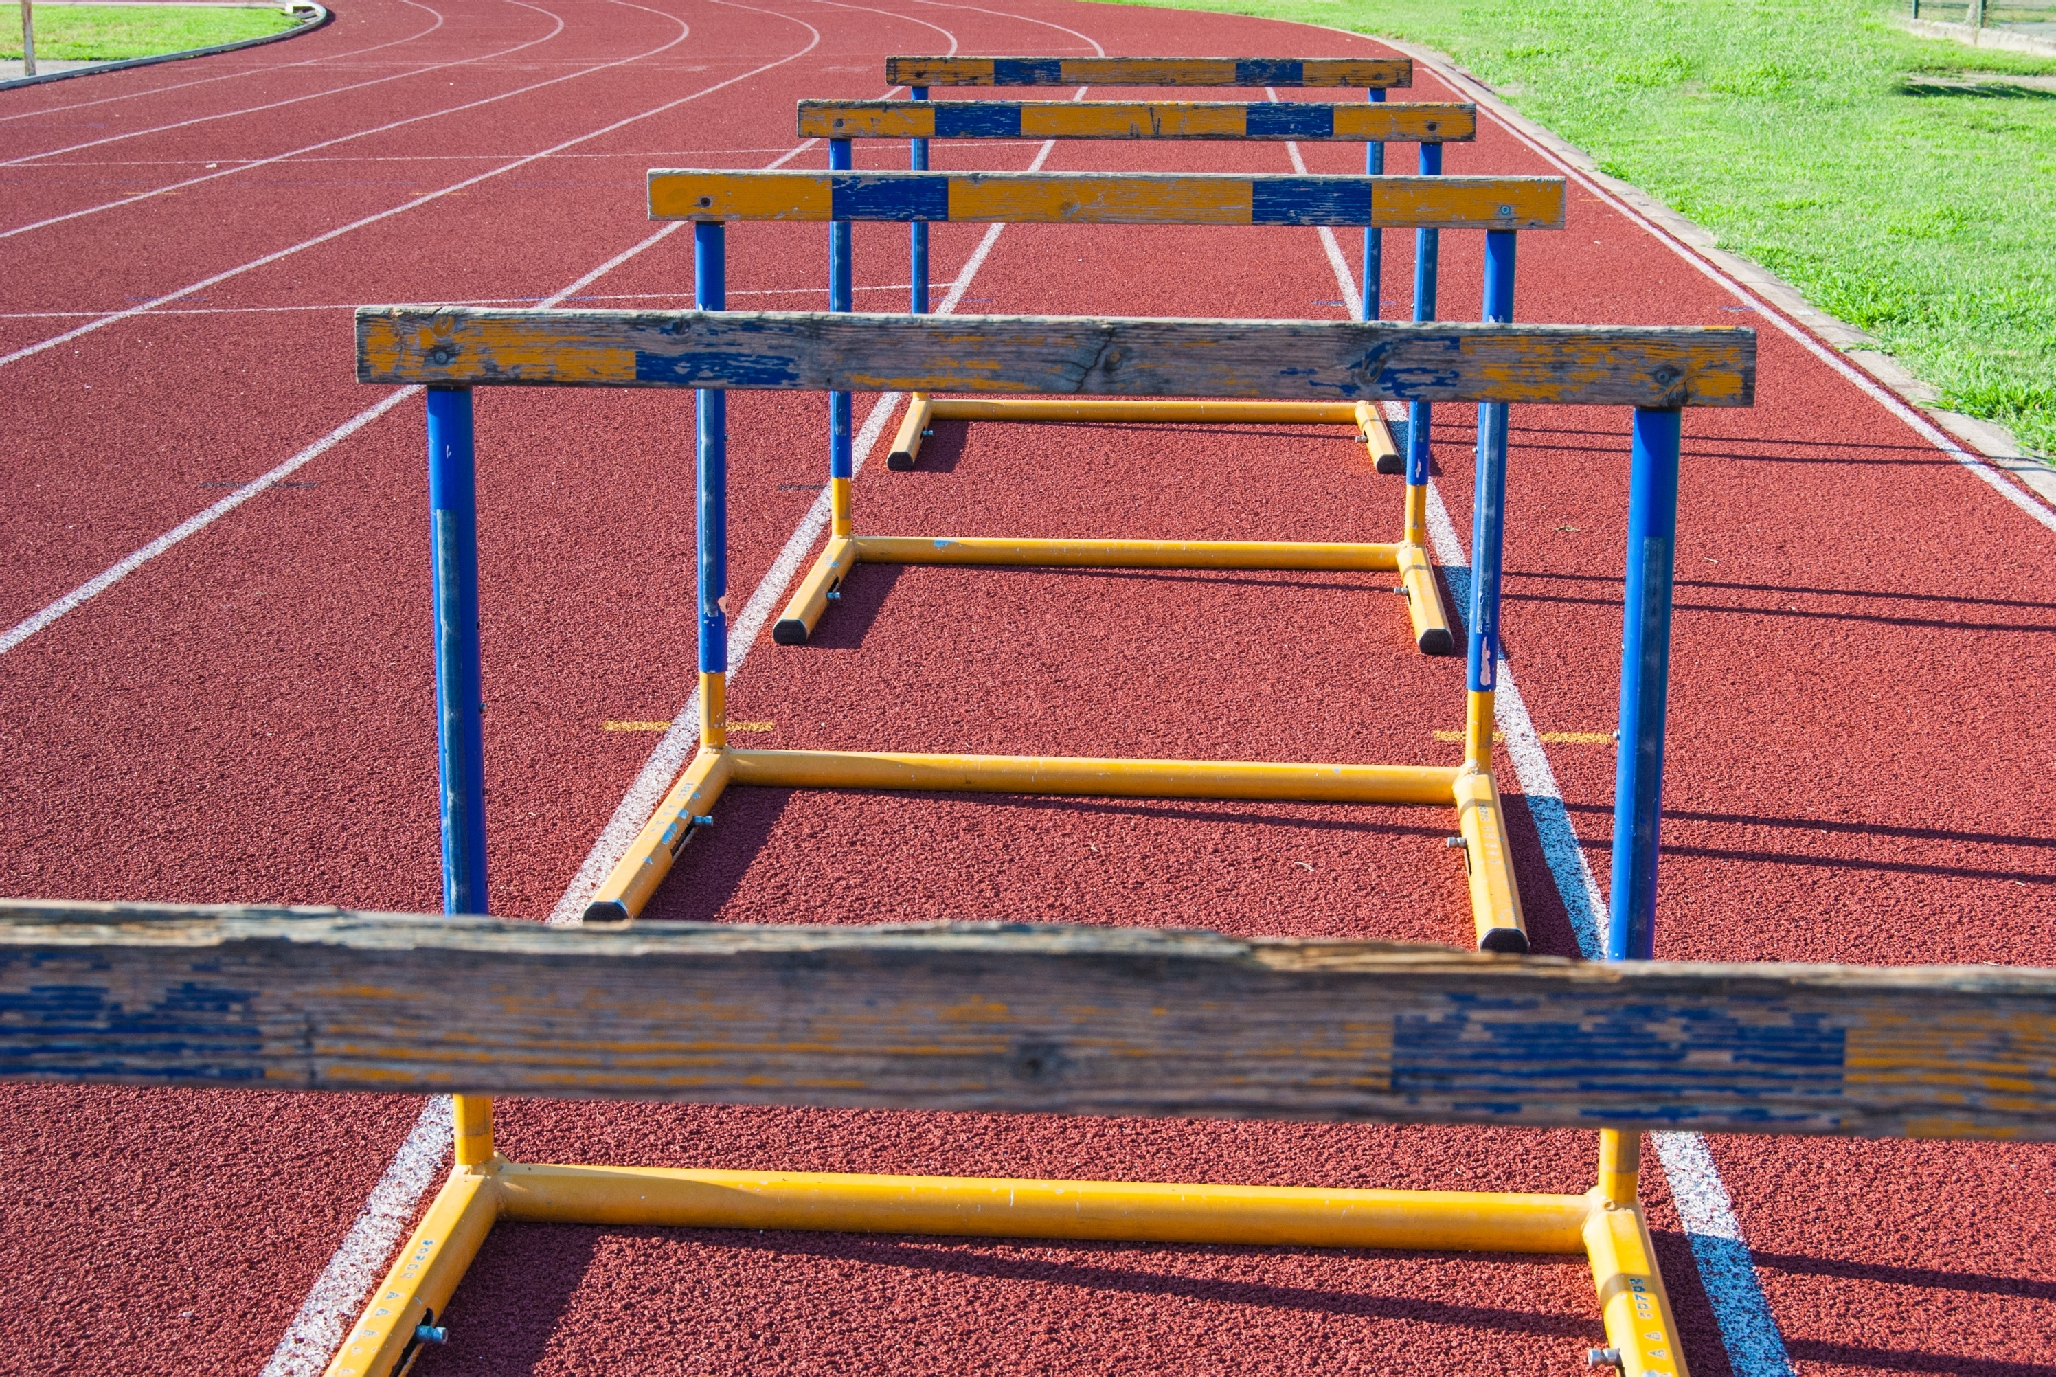 Hurdles lined up on a track